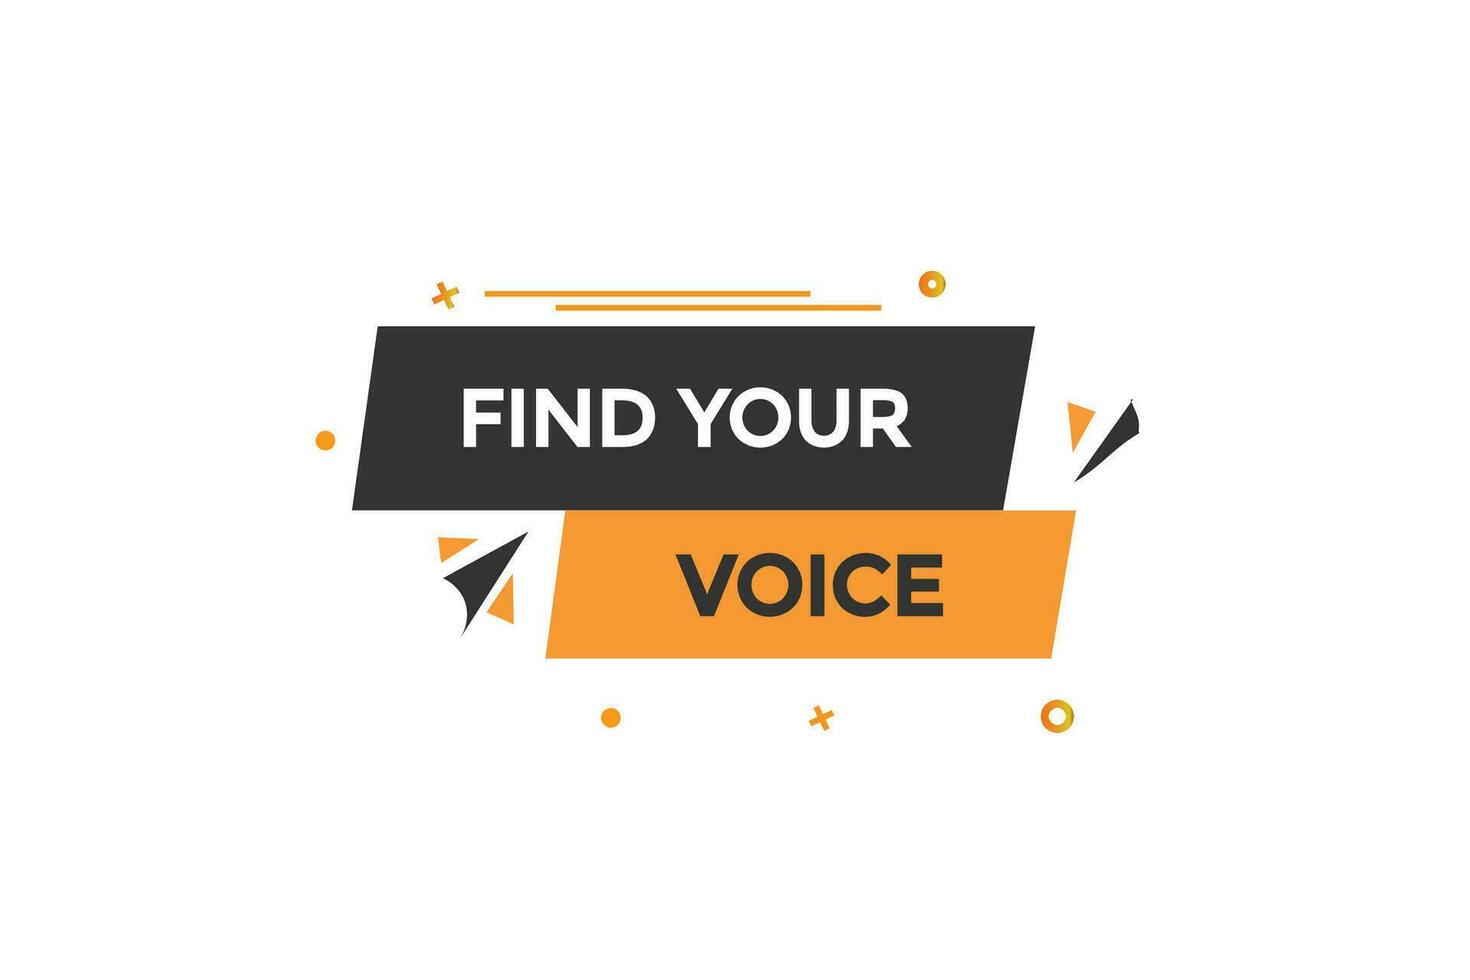 new find your voice website, click button, level, sign, speech, bubble  banner, vector